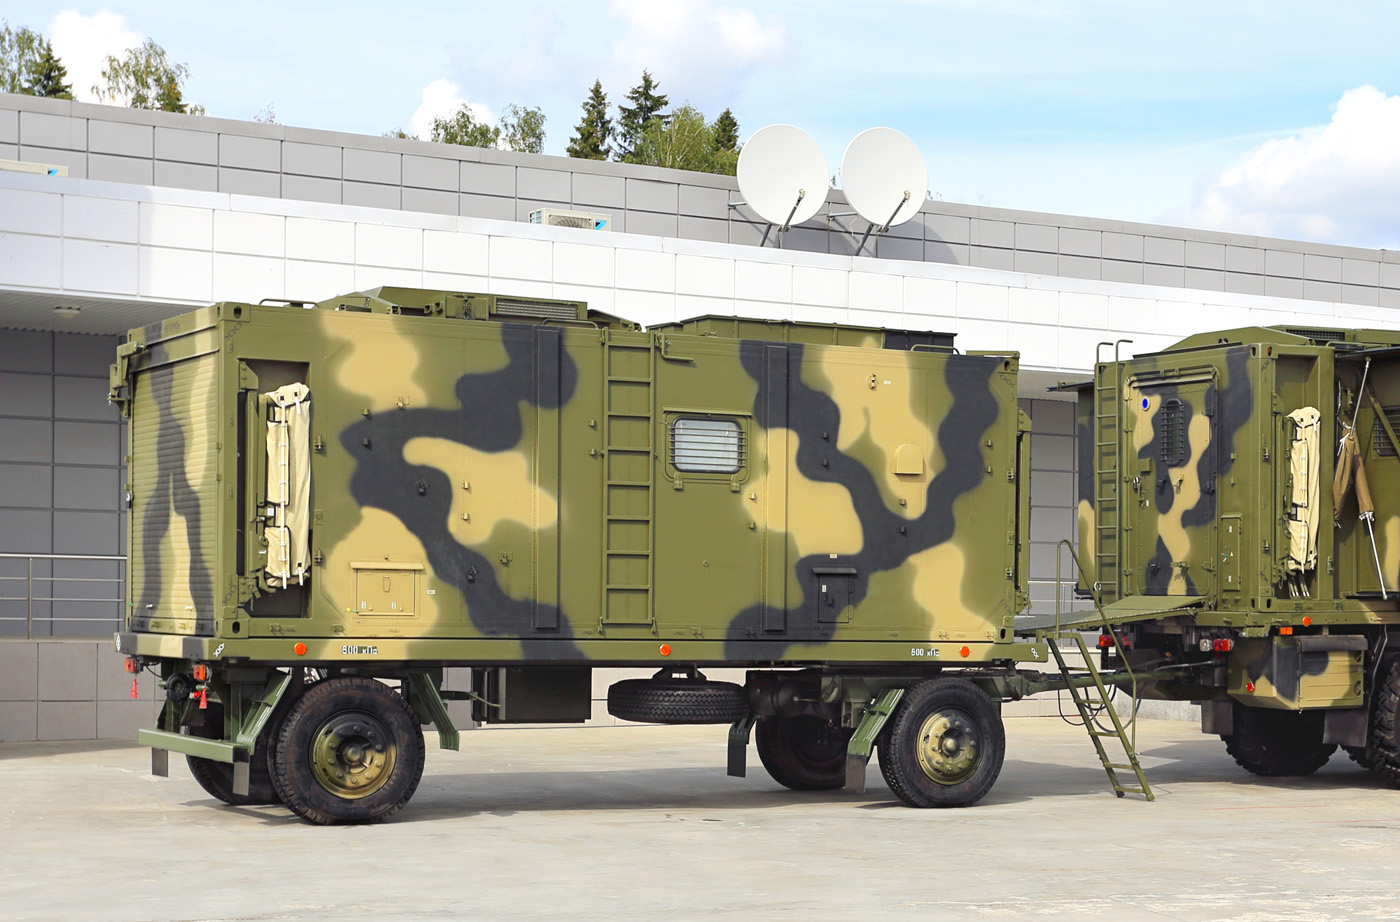 Two camo mobile military applications hitched together parked in front of a building